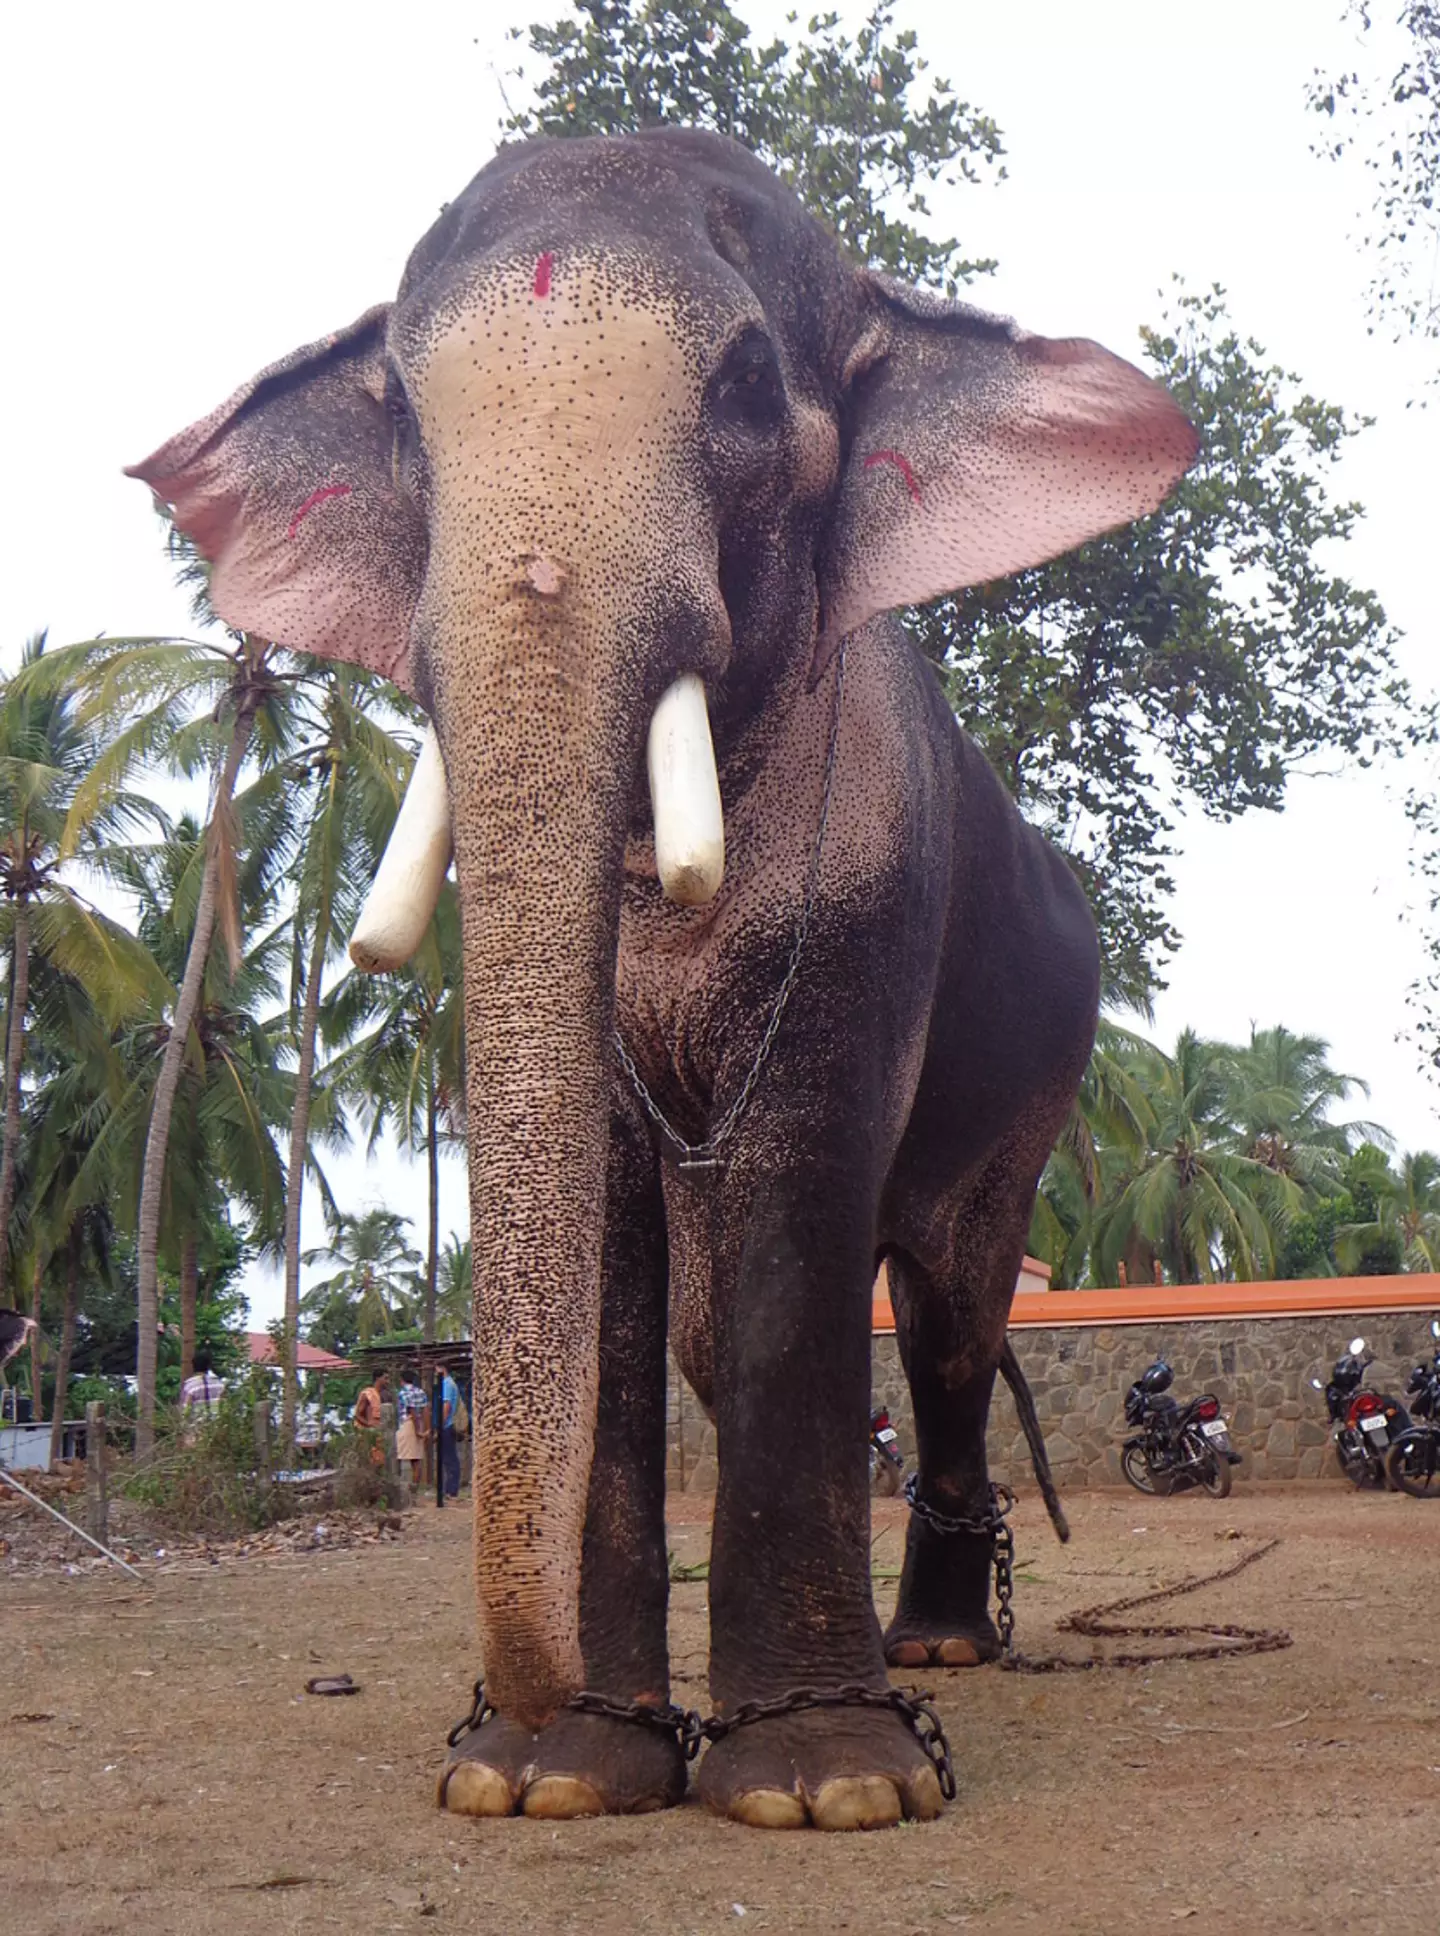 This is one elephant you wouldn't want to mess with.